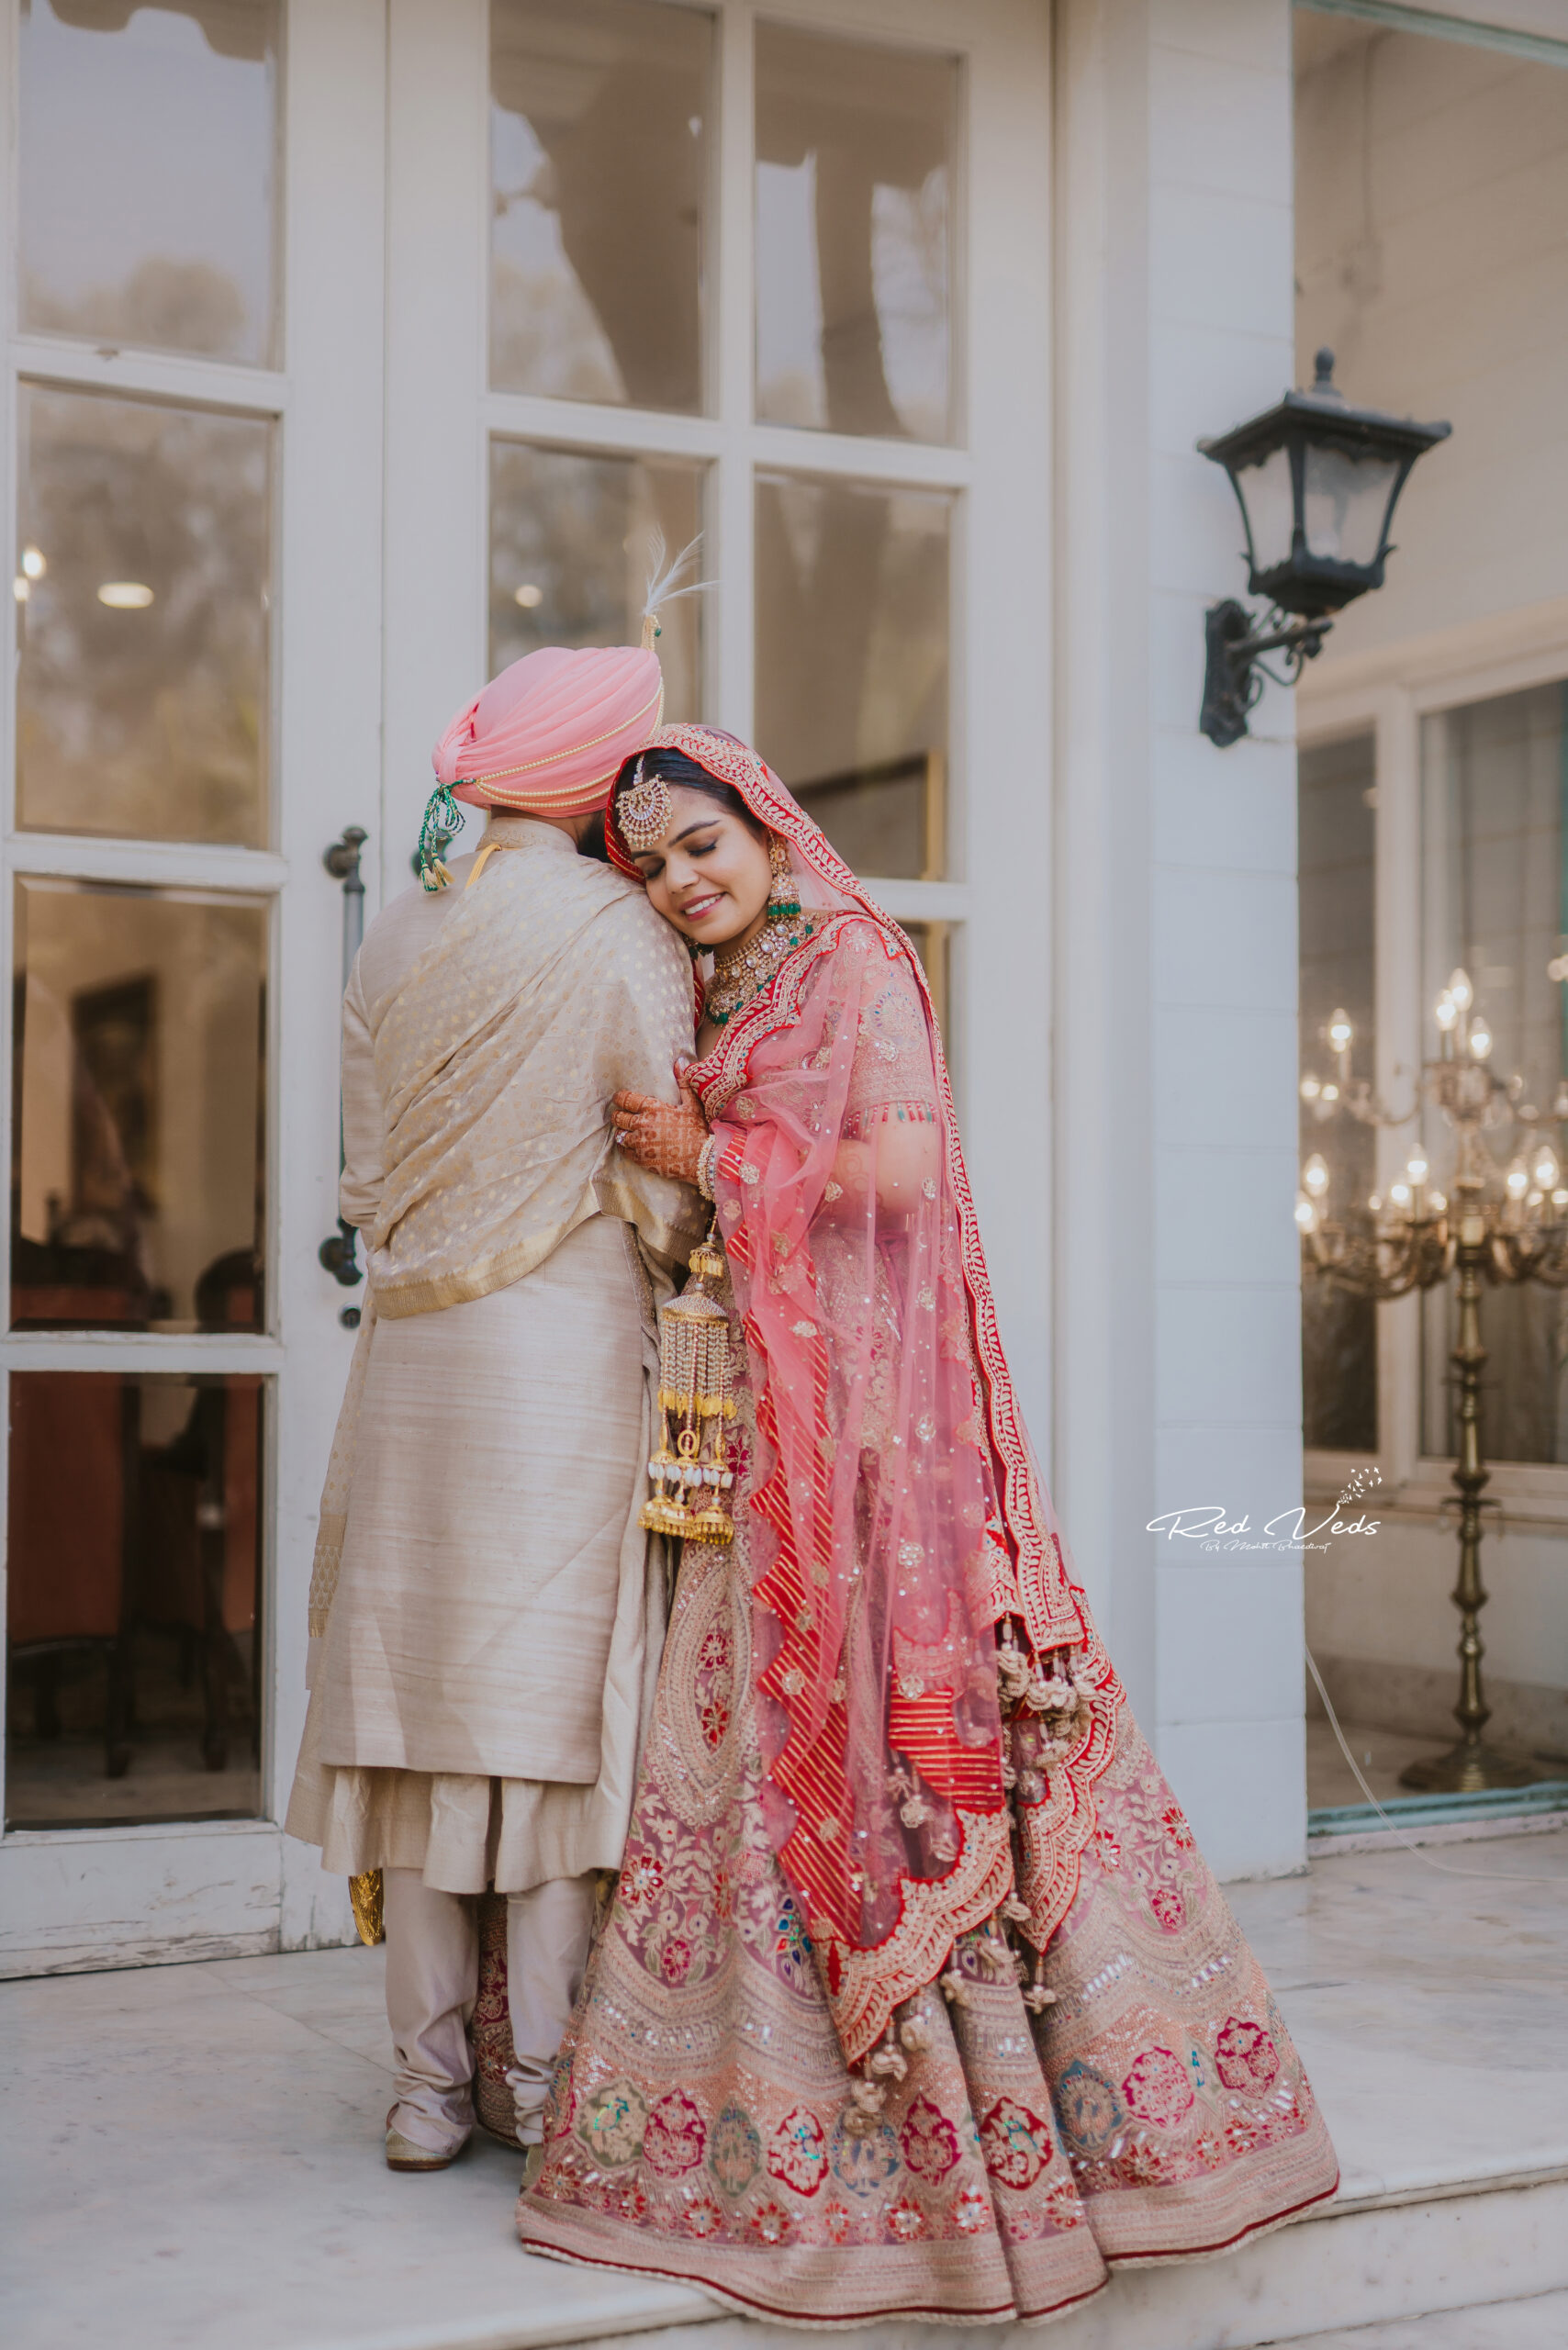 A 3-Day Indian Wedding Celebration in Greensboro - Crystal Genes Photography